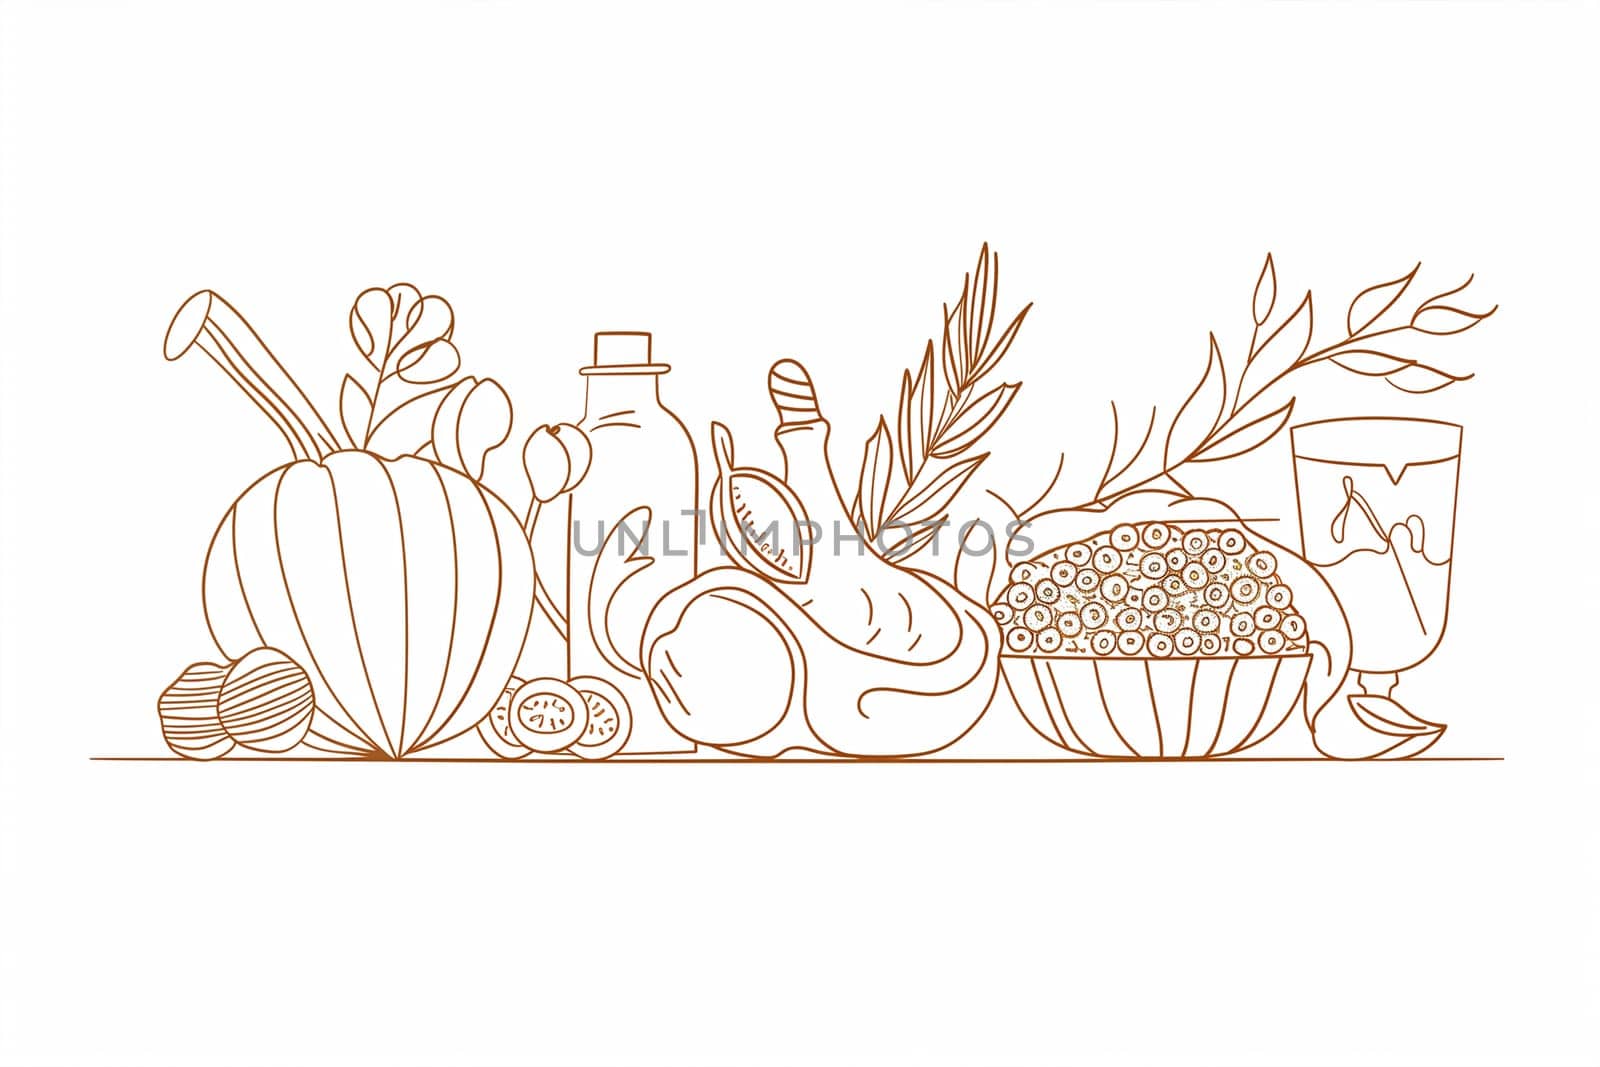 Assorted Food Line Drawing by Sd28DimoN_1976